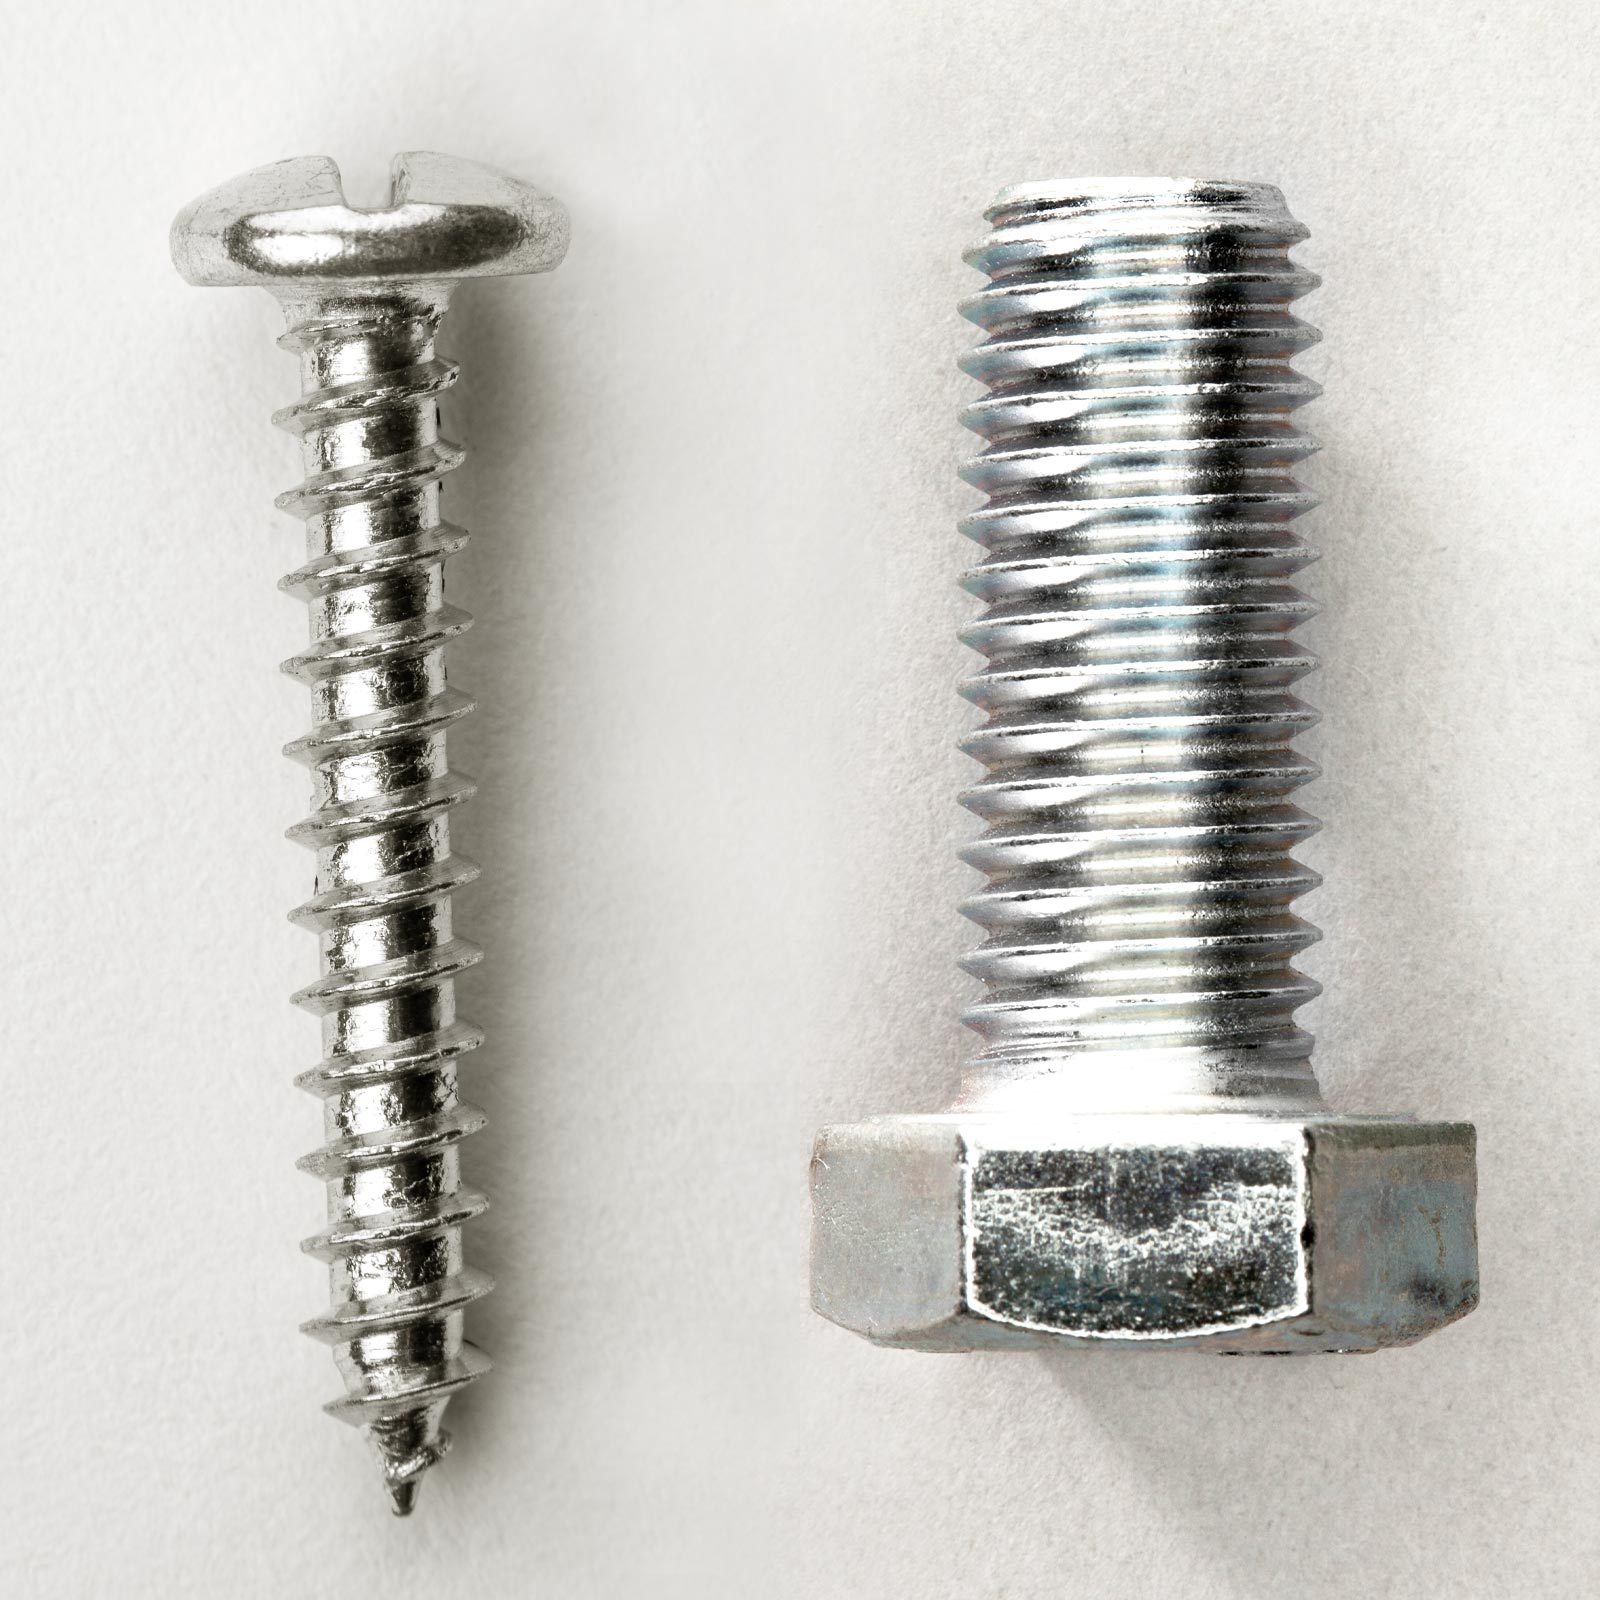 How a Bolt Works